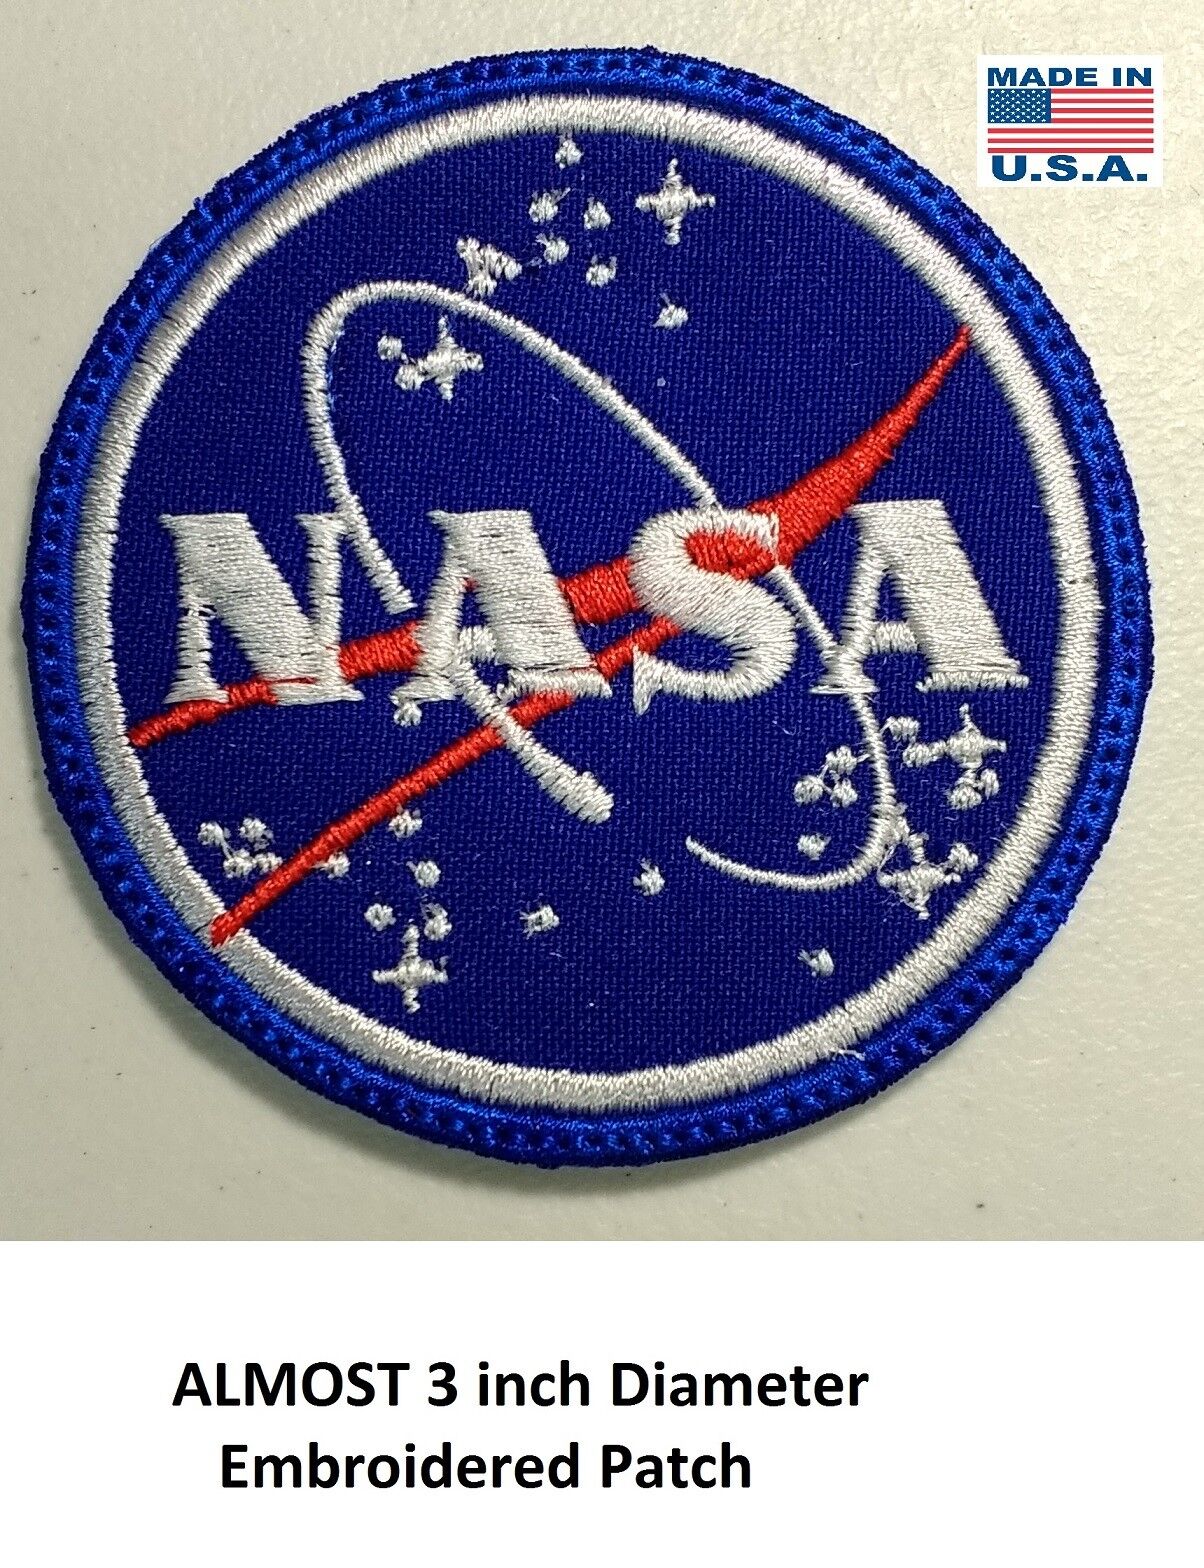 NASA EMBROIDERED PATCH, IRON ON, FREE SH